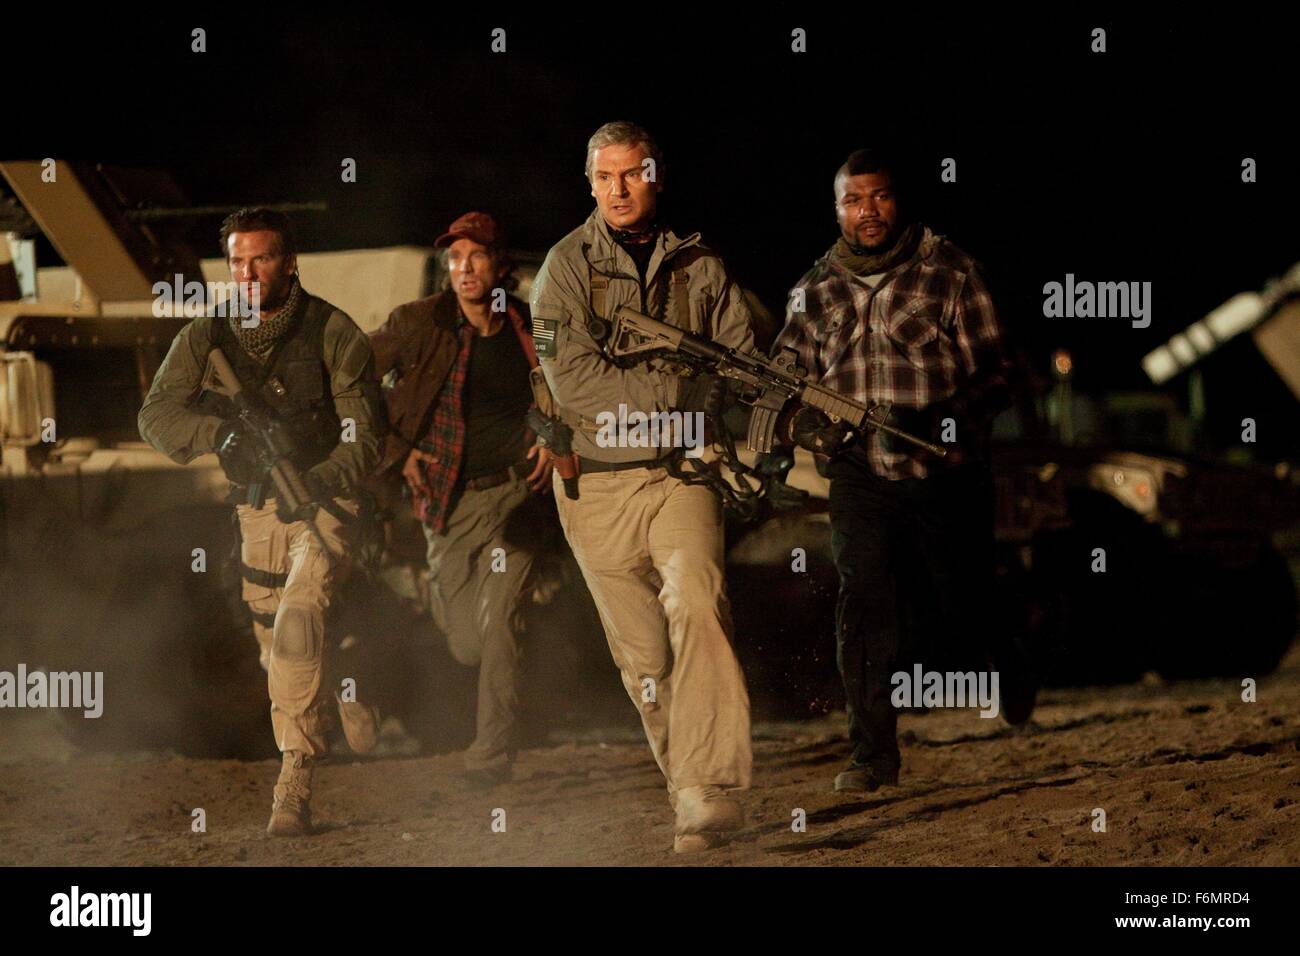 RELEASE DATE: 11 June 2010. TITLE: The A-Team. STUDIO: Twentieth Century Fox. PLOT: A group of Iraq War veterans looks to clear their name with the U.S. military, who suspect the four men of committing a crime for which they were framed. PICTURED: LIAM NEESON as Col. John 'Hannibal' Smith with QUINTON 'RAMPAGE' JACKSON as Cpl. Bosco 'B.A.' Baracus, SHARLTO COPLEY as Murdock and BRADLEY COOPER as Lt. Templeton 'Faceman' Peck. Stock Photo